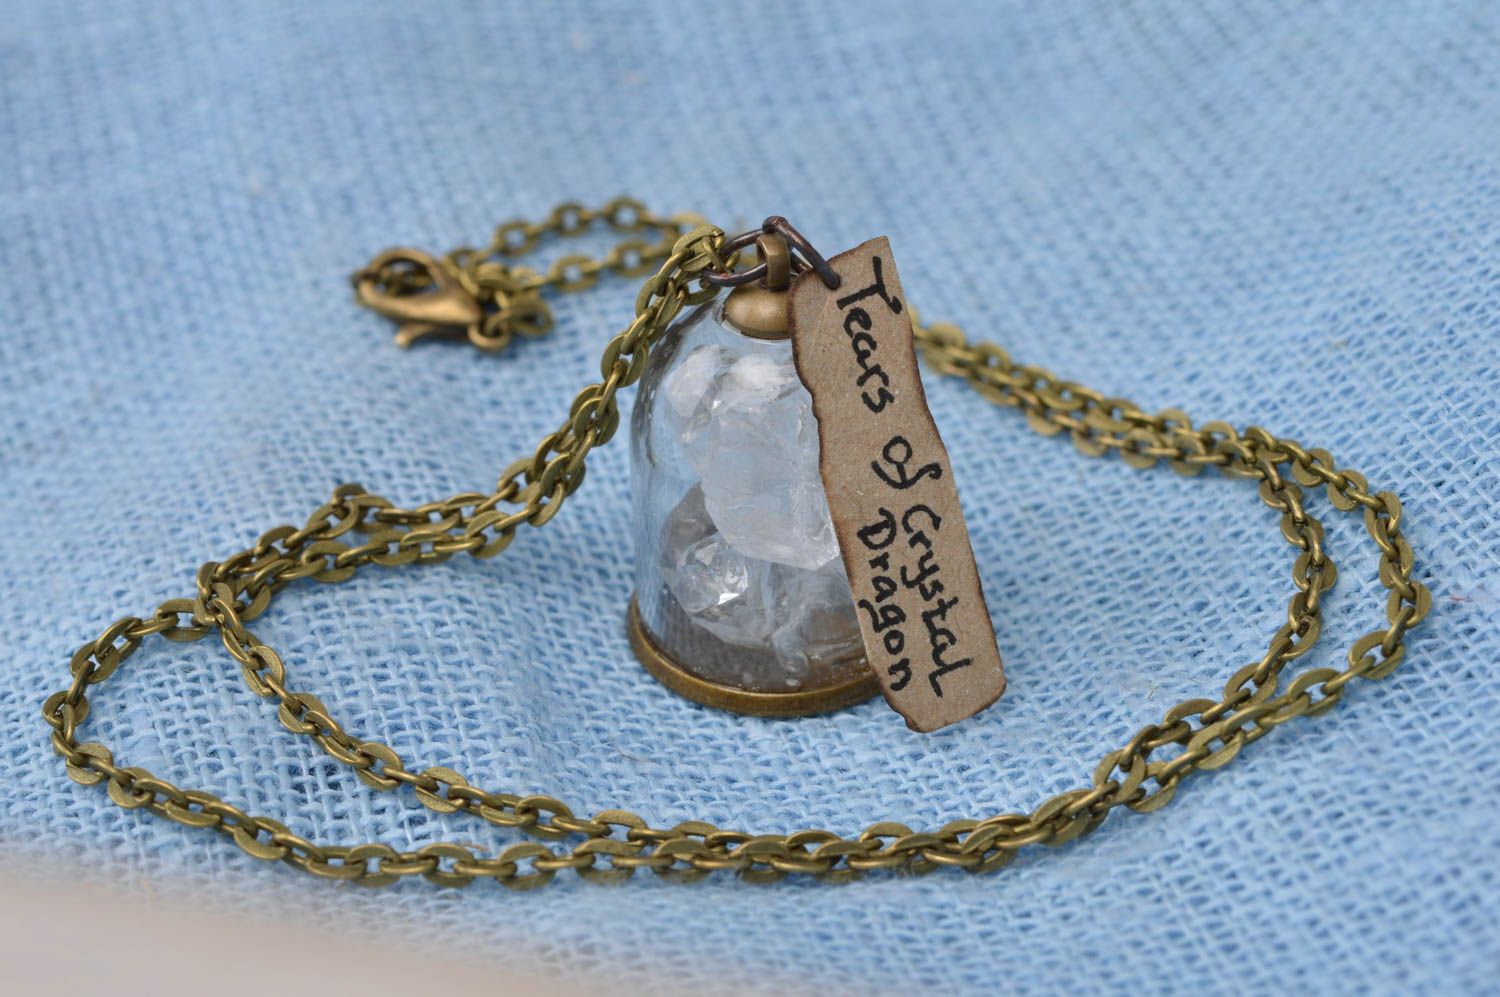 Handmade cute pendant in shape of glass jar with crystals inside on chain photo 1